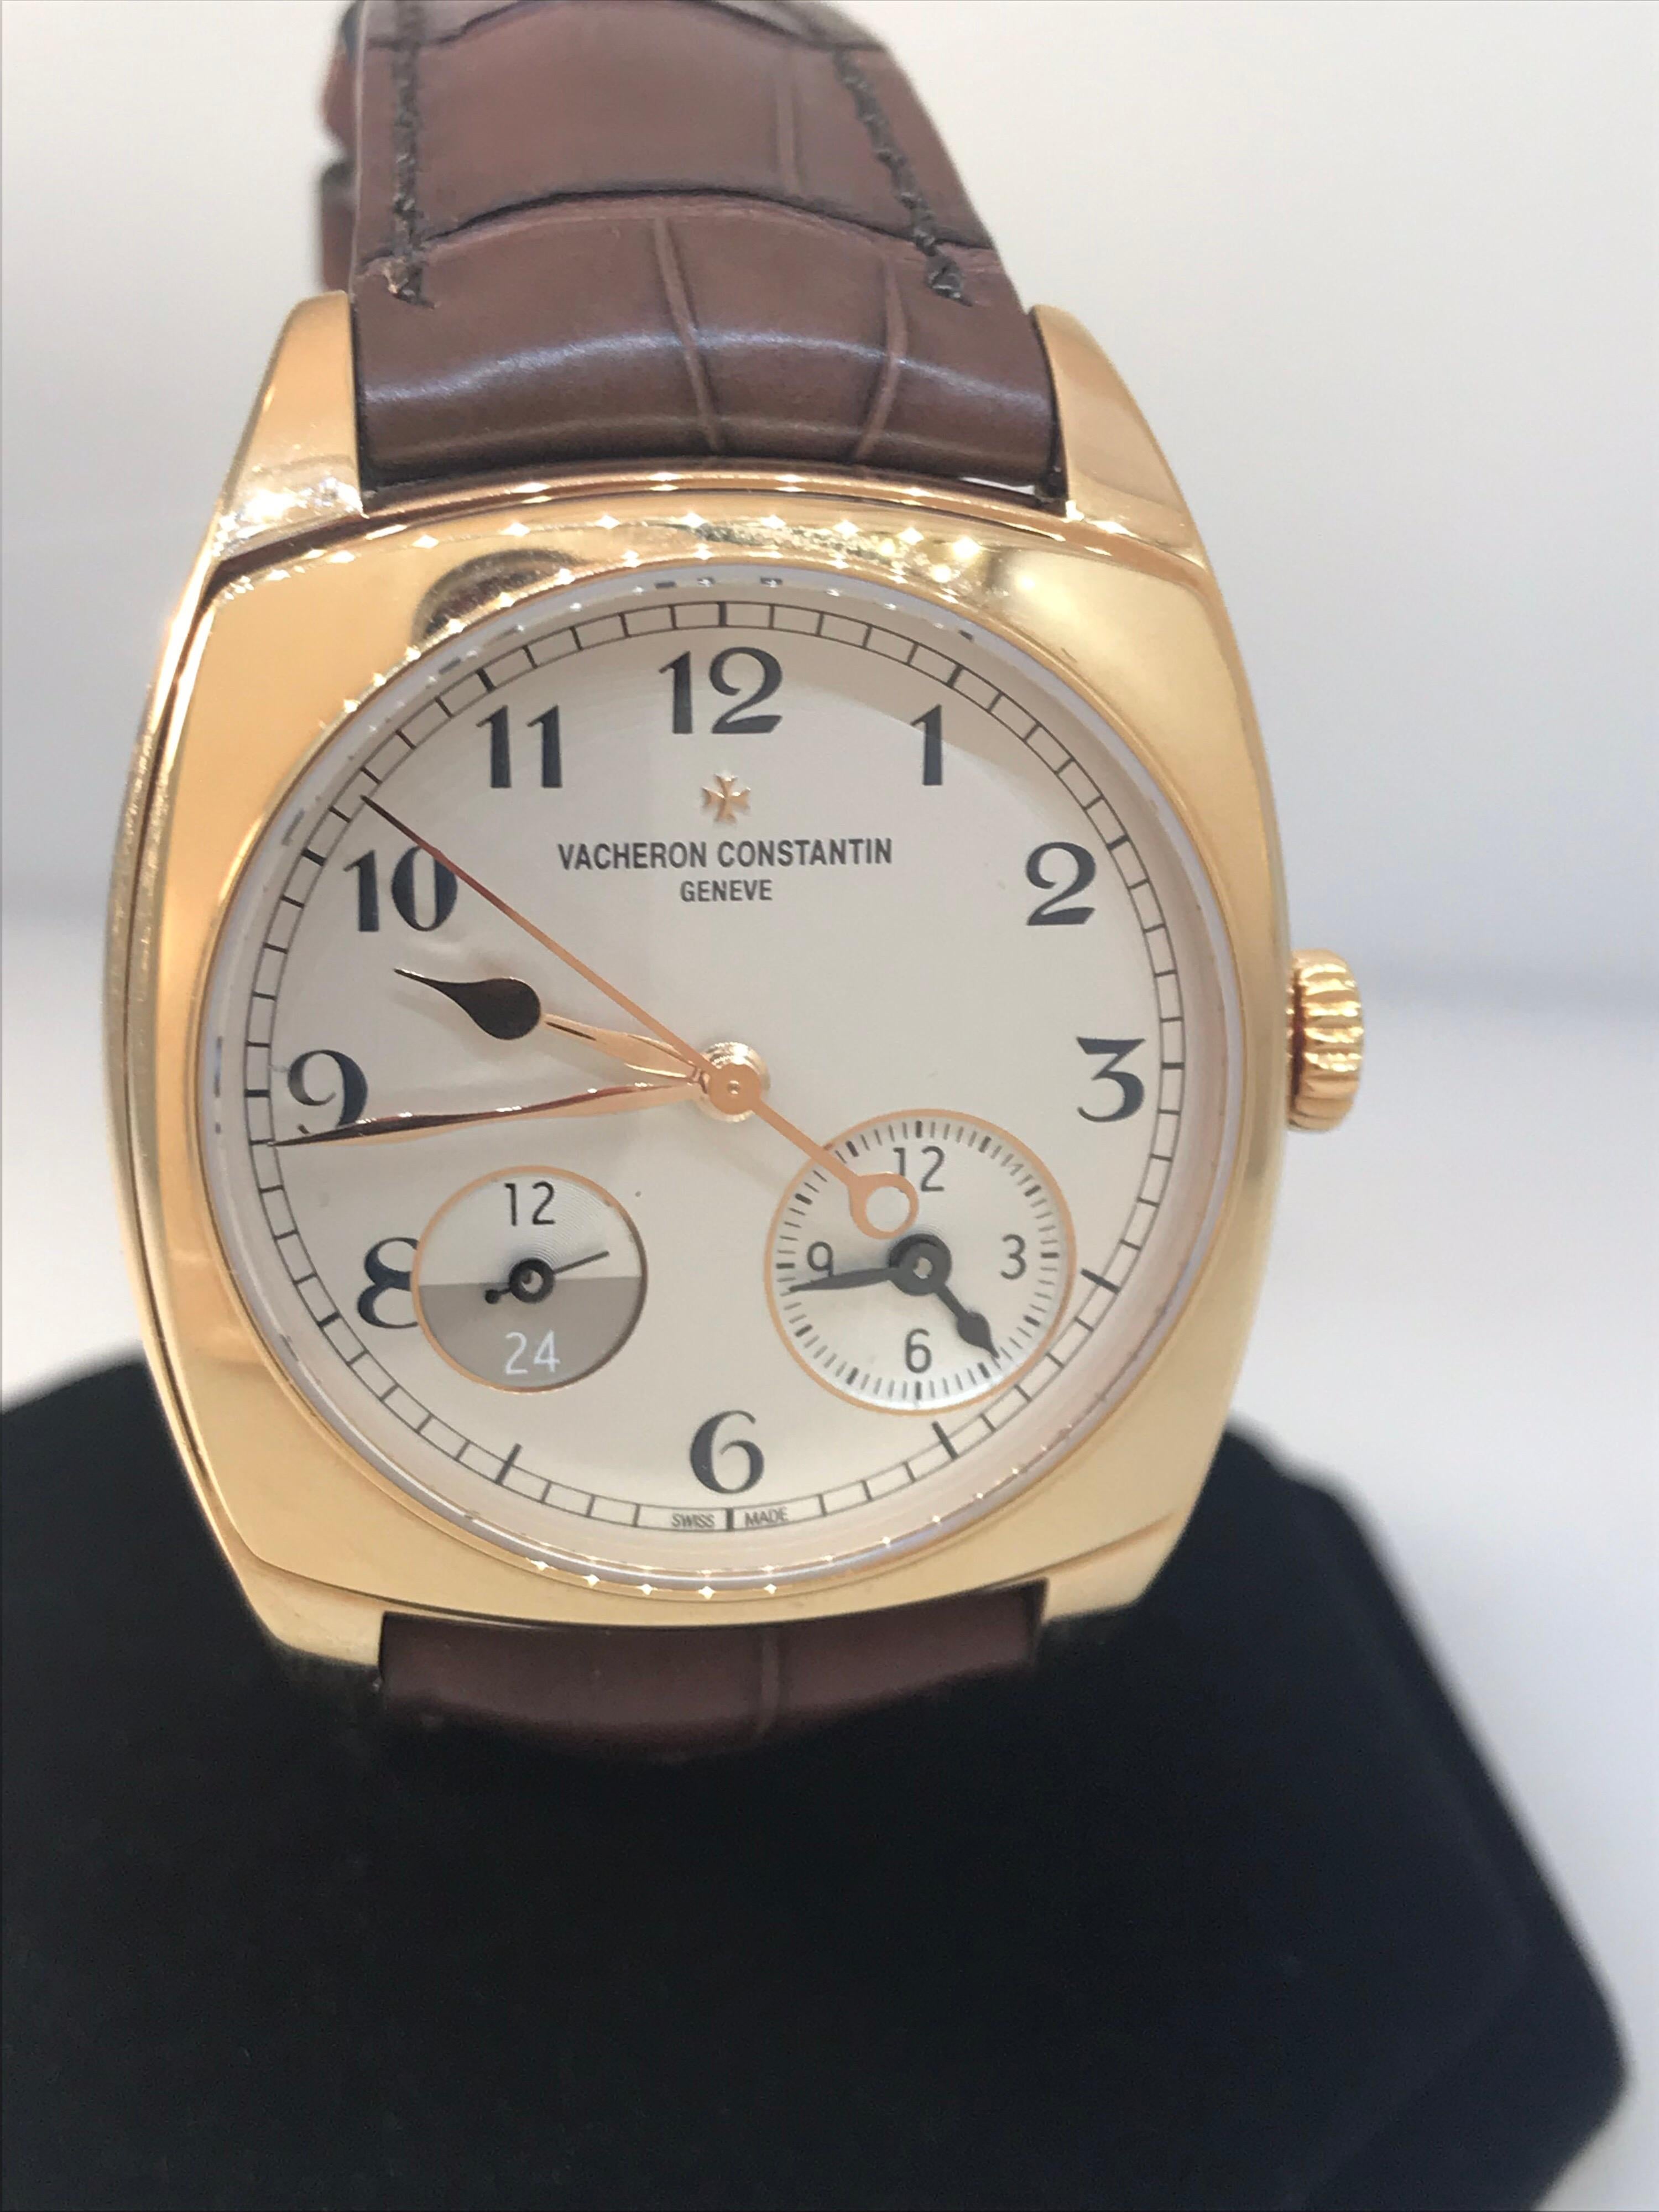 Vacheron Constantin Harmony Dual Time Men's Watch

Model Number: 7810s/000R-B141

100% Authentic

Brand new

Comes with original Vacheron Constantin Box and Papers

18 Karat Rose Gold Case & Buckle

Silver Dial

Case Size: 40mm x 49.30mm  

Caliver